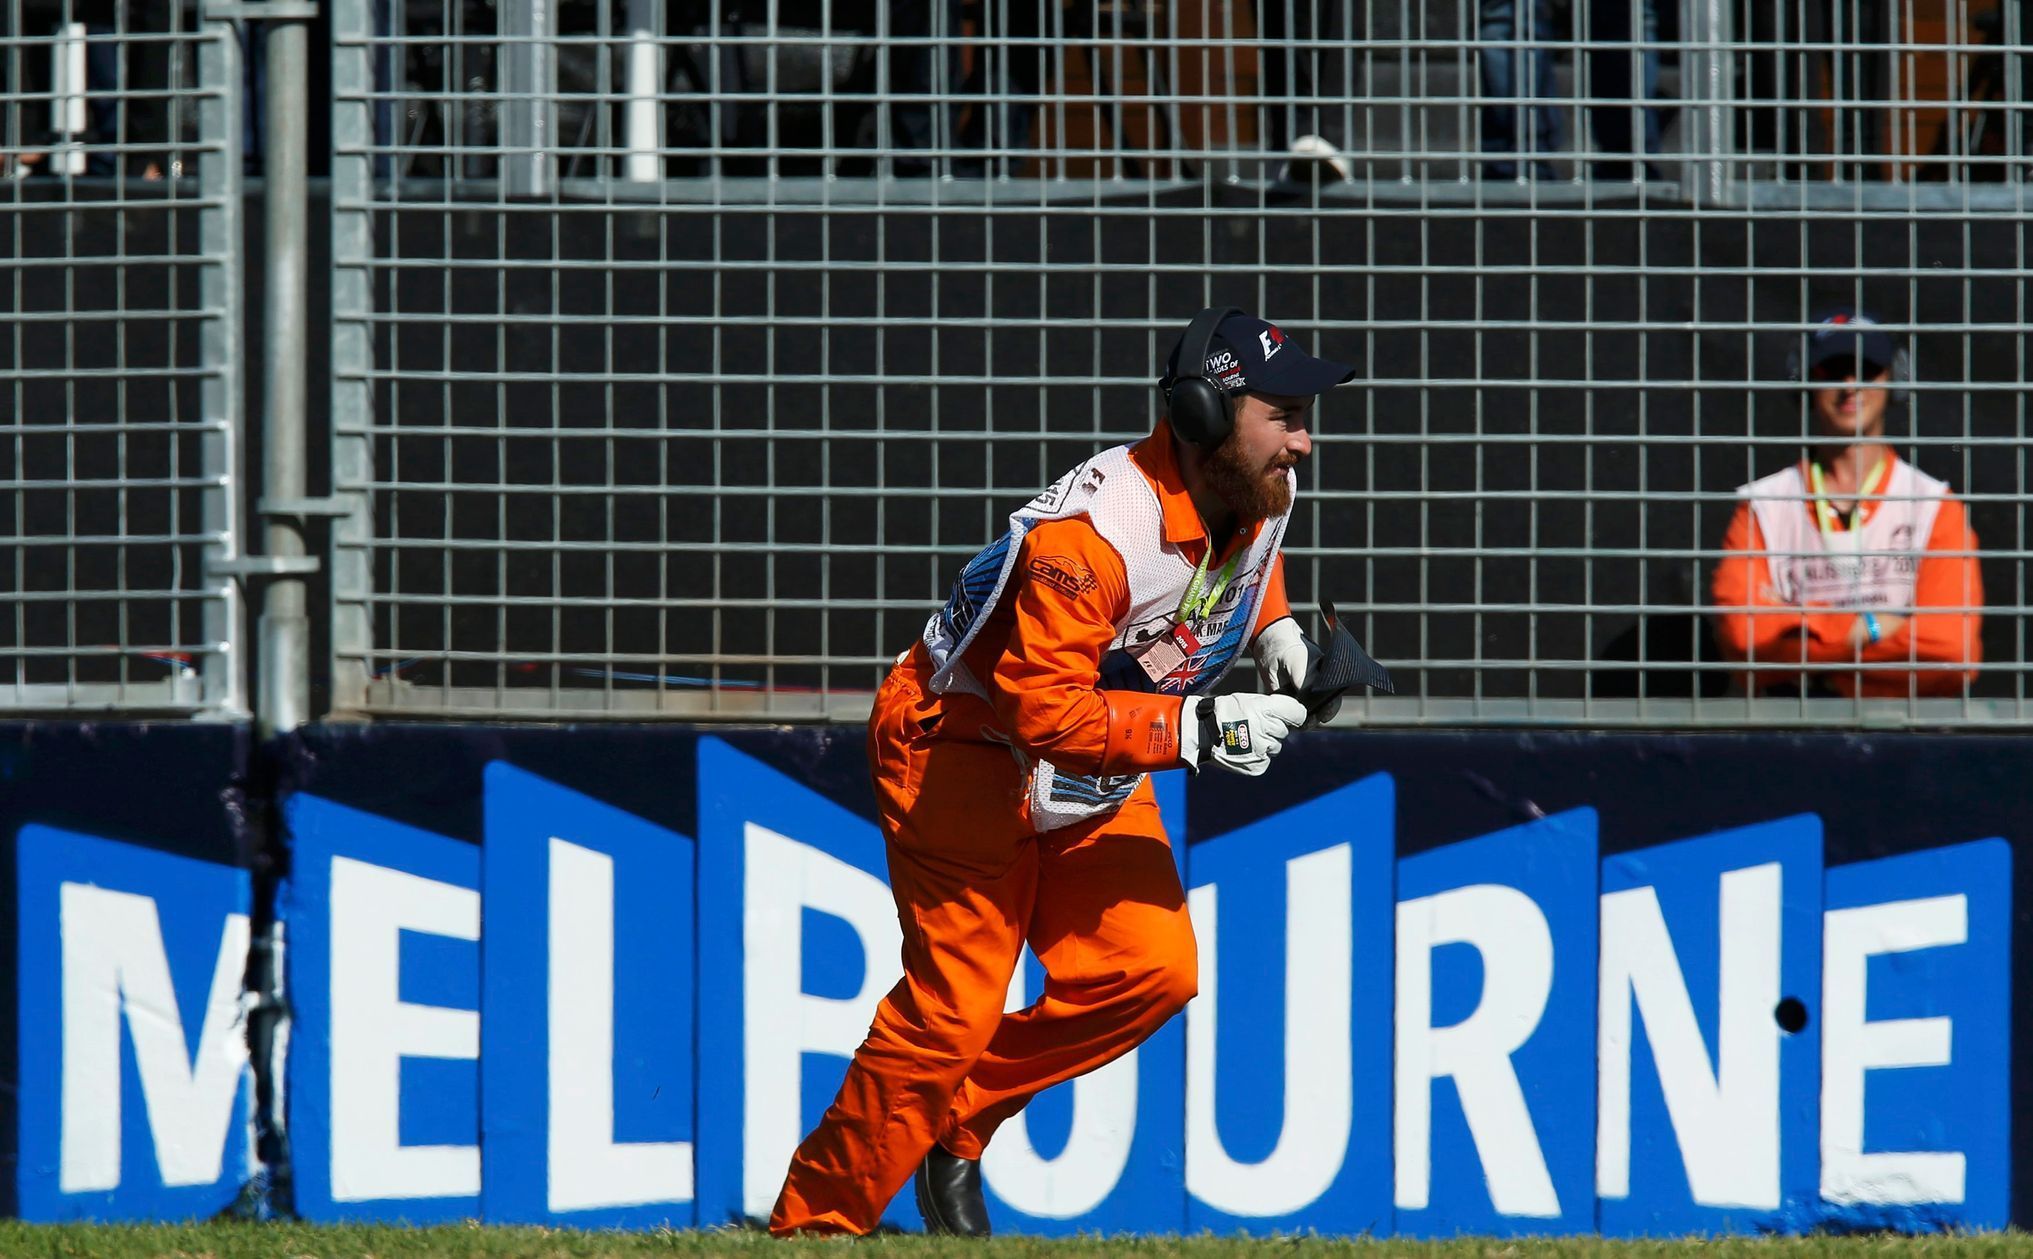 A race marshall picks up debris during the Australian F1 Grand Prix at the Albert Park circuit in Melbourne